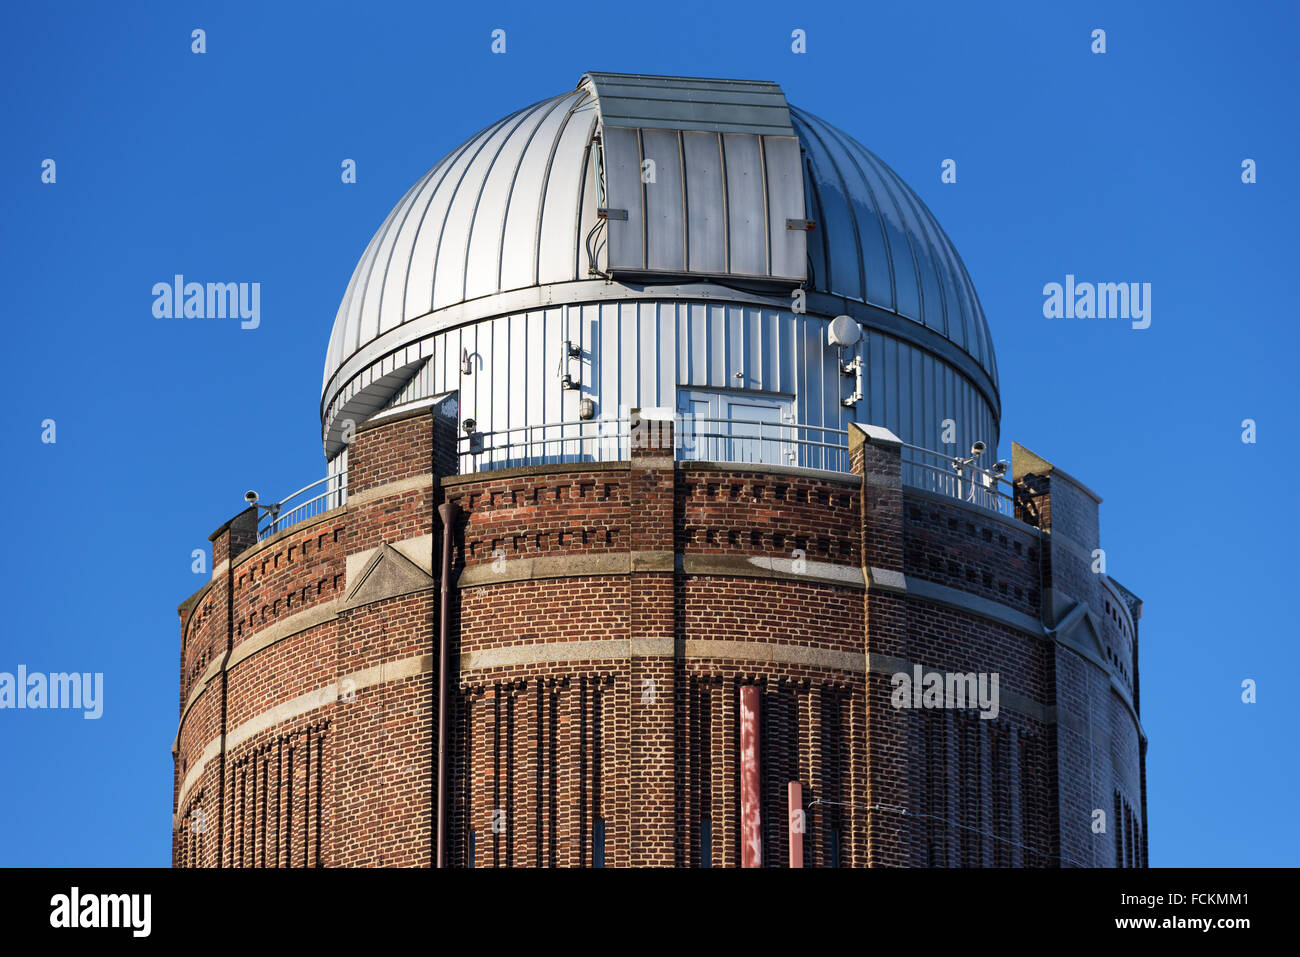 Lund, Sweden - January 21, 2016: The top part of the southern astronomy observation tower in Lund against a blue sky. The metal Stock Photo